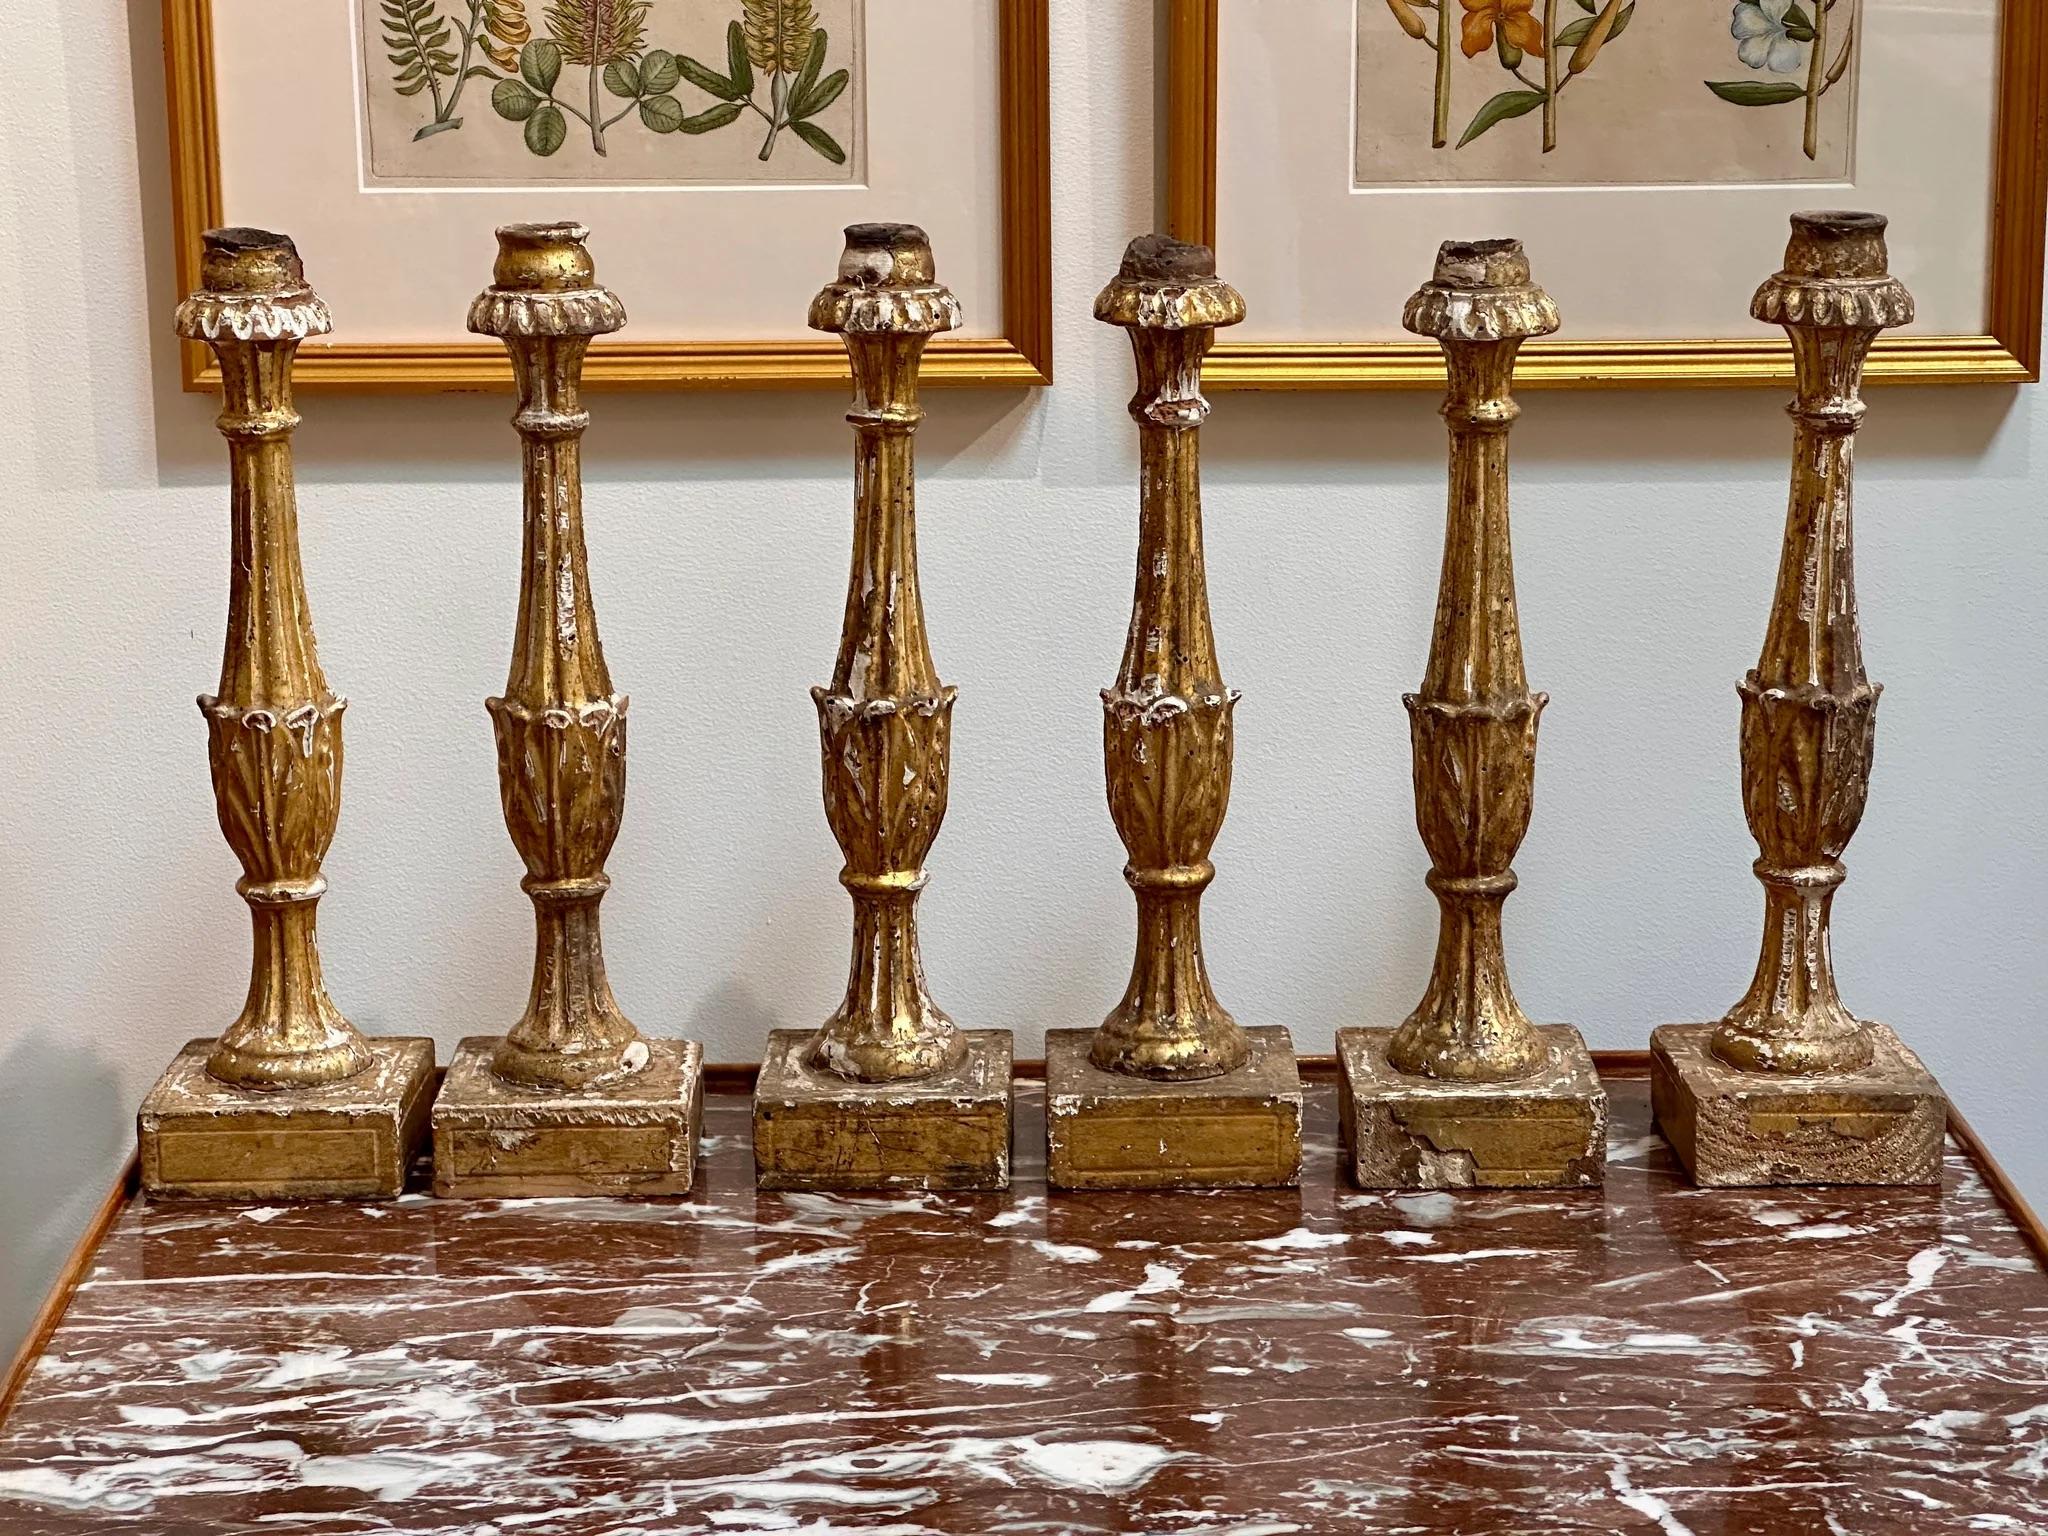 Rare set of Six Italian Carved Giltwood Candlesticks, 18th Century. Having fine reeding and acanthus leaf carving in vase form on square plinths.   15